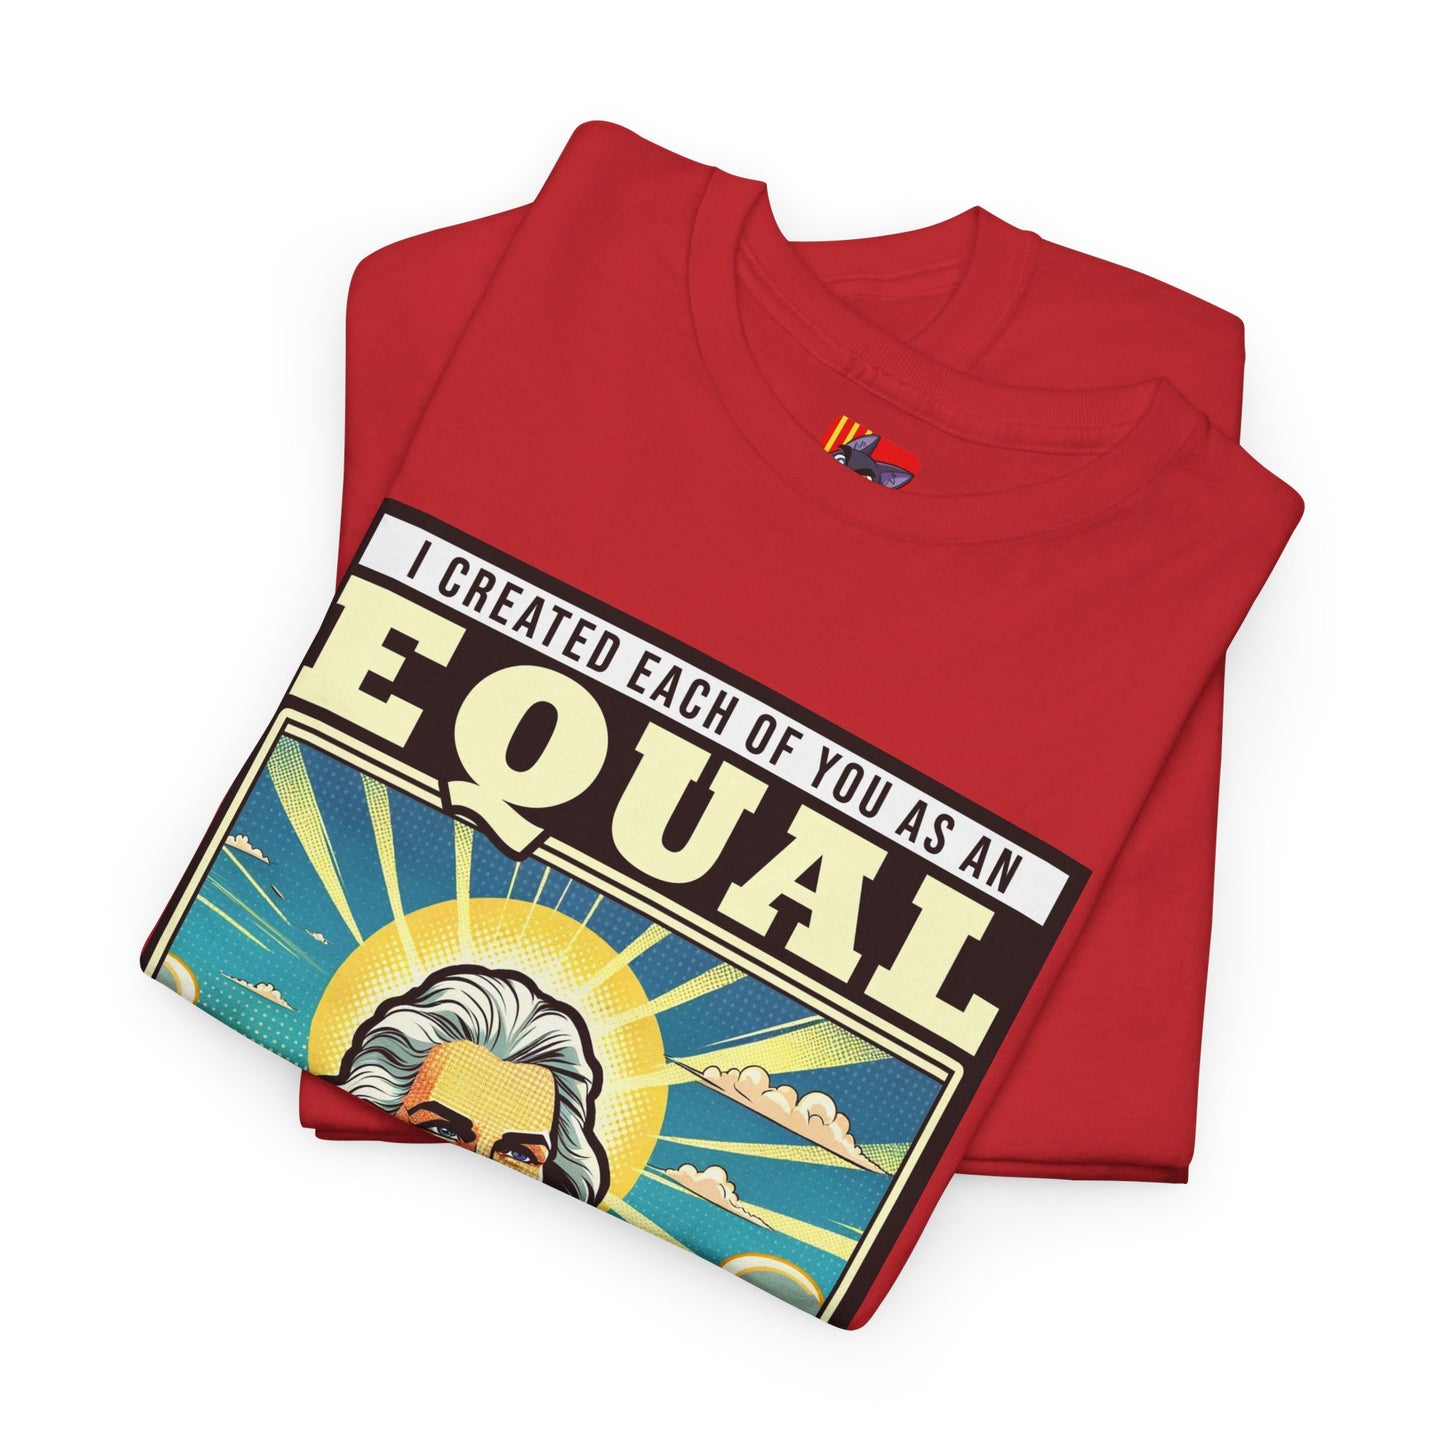 The Free Speech Advocate T-Shirt: I created each of as an equal in my eyes